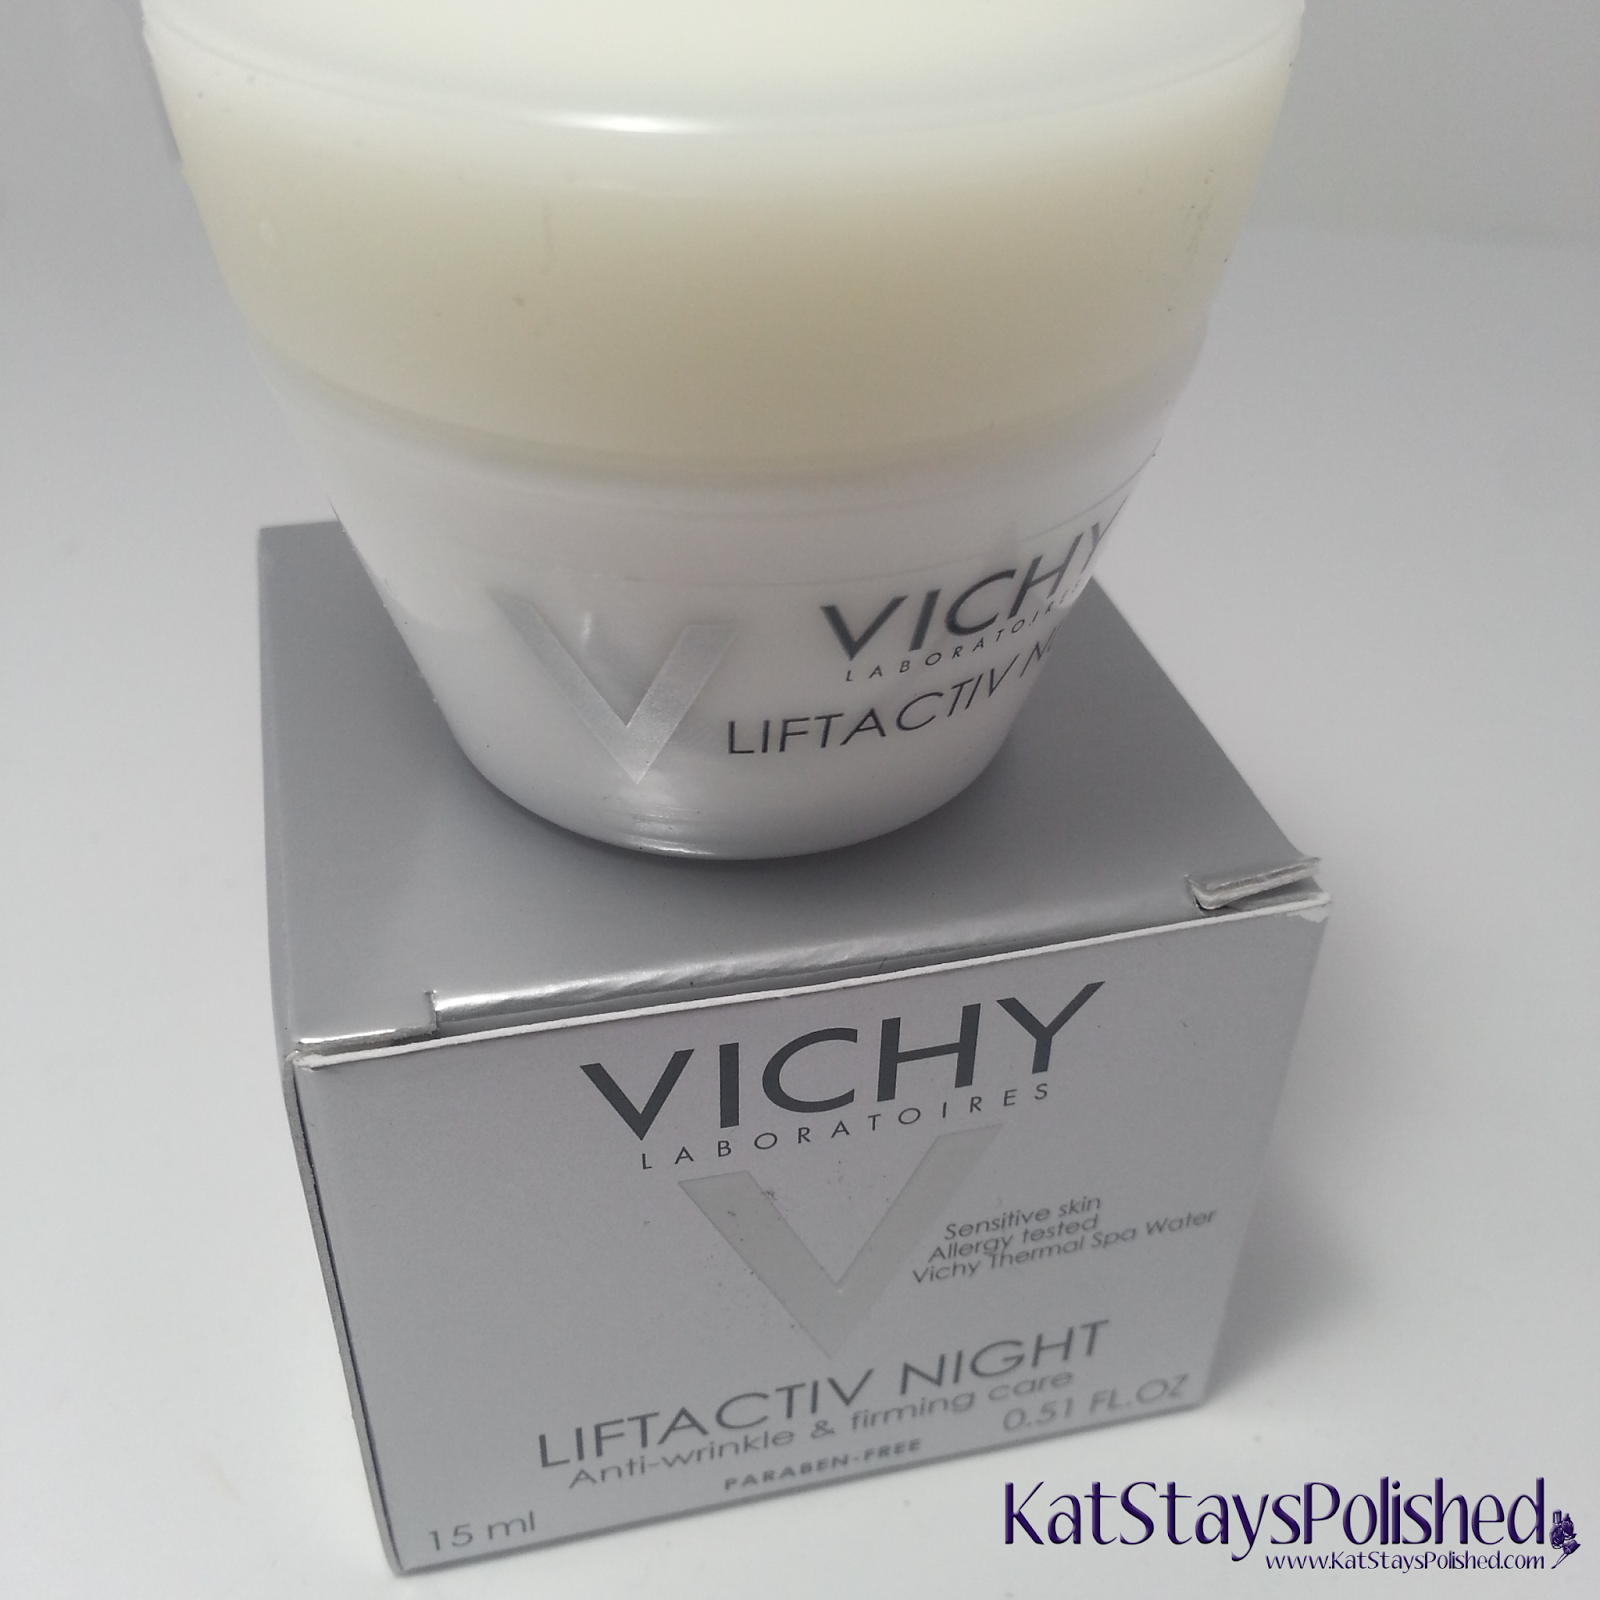 Glossybox for Harper's Bazaar - September 2014 - Vichy Liftactiv Night Firming Cream | Kat Stays Polished